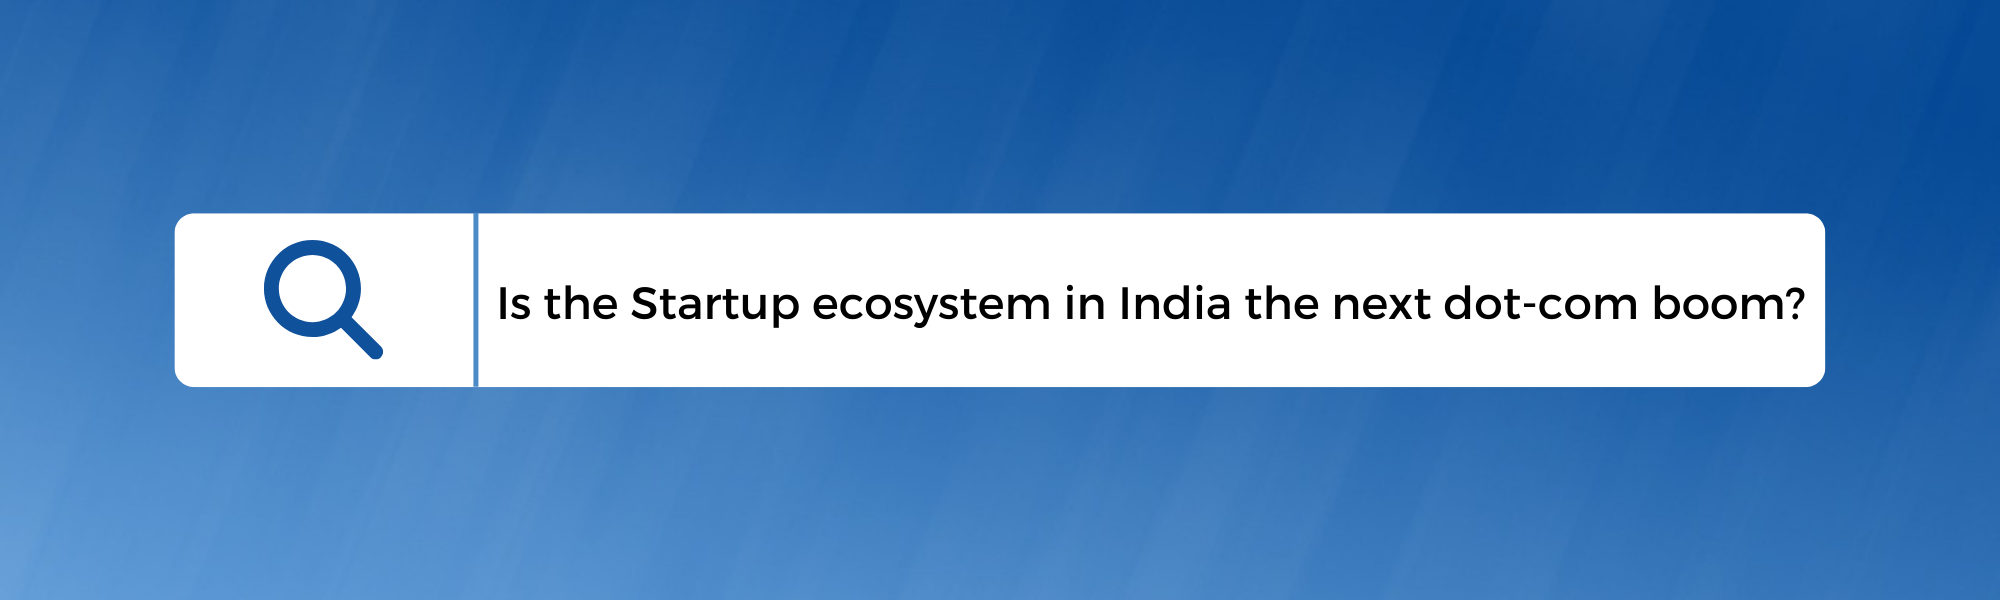 Is the Startup ecosystem in India the next dot-com boom?